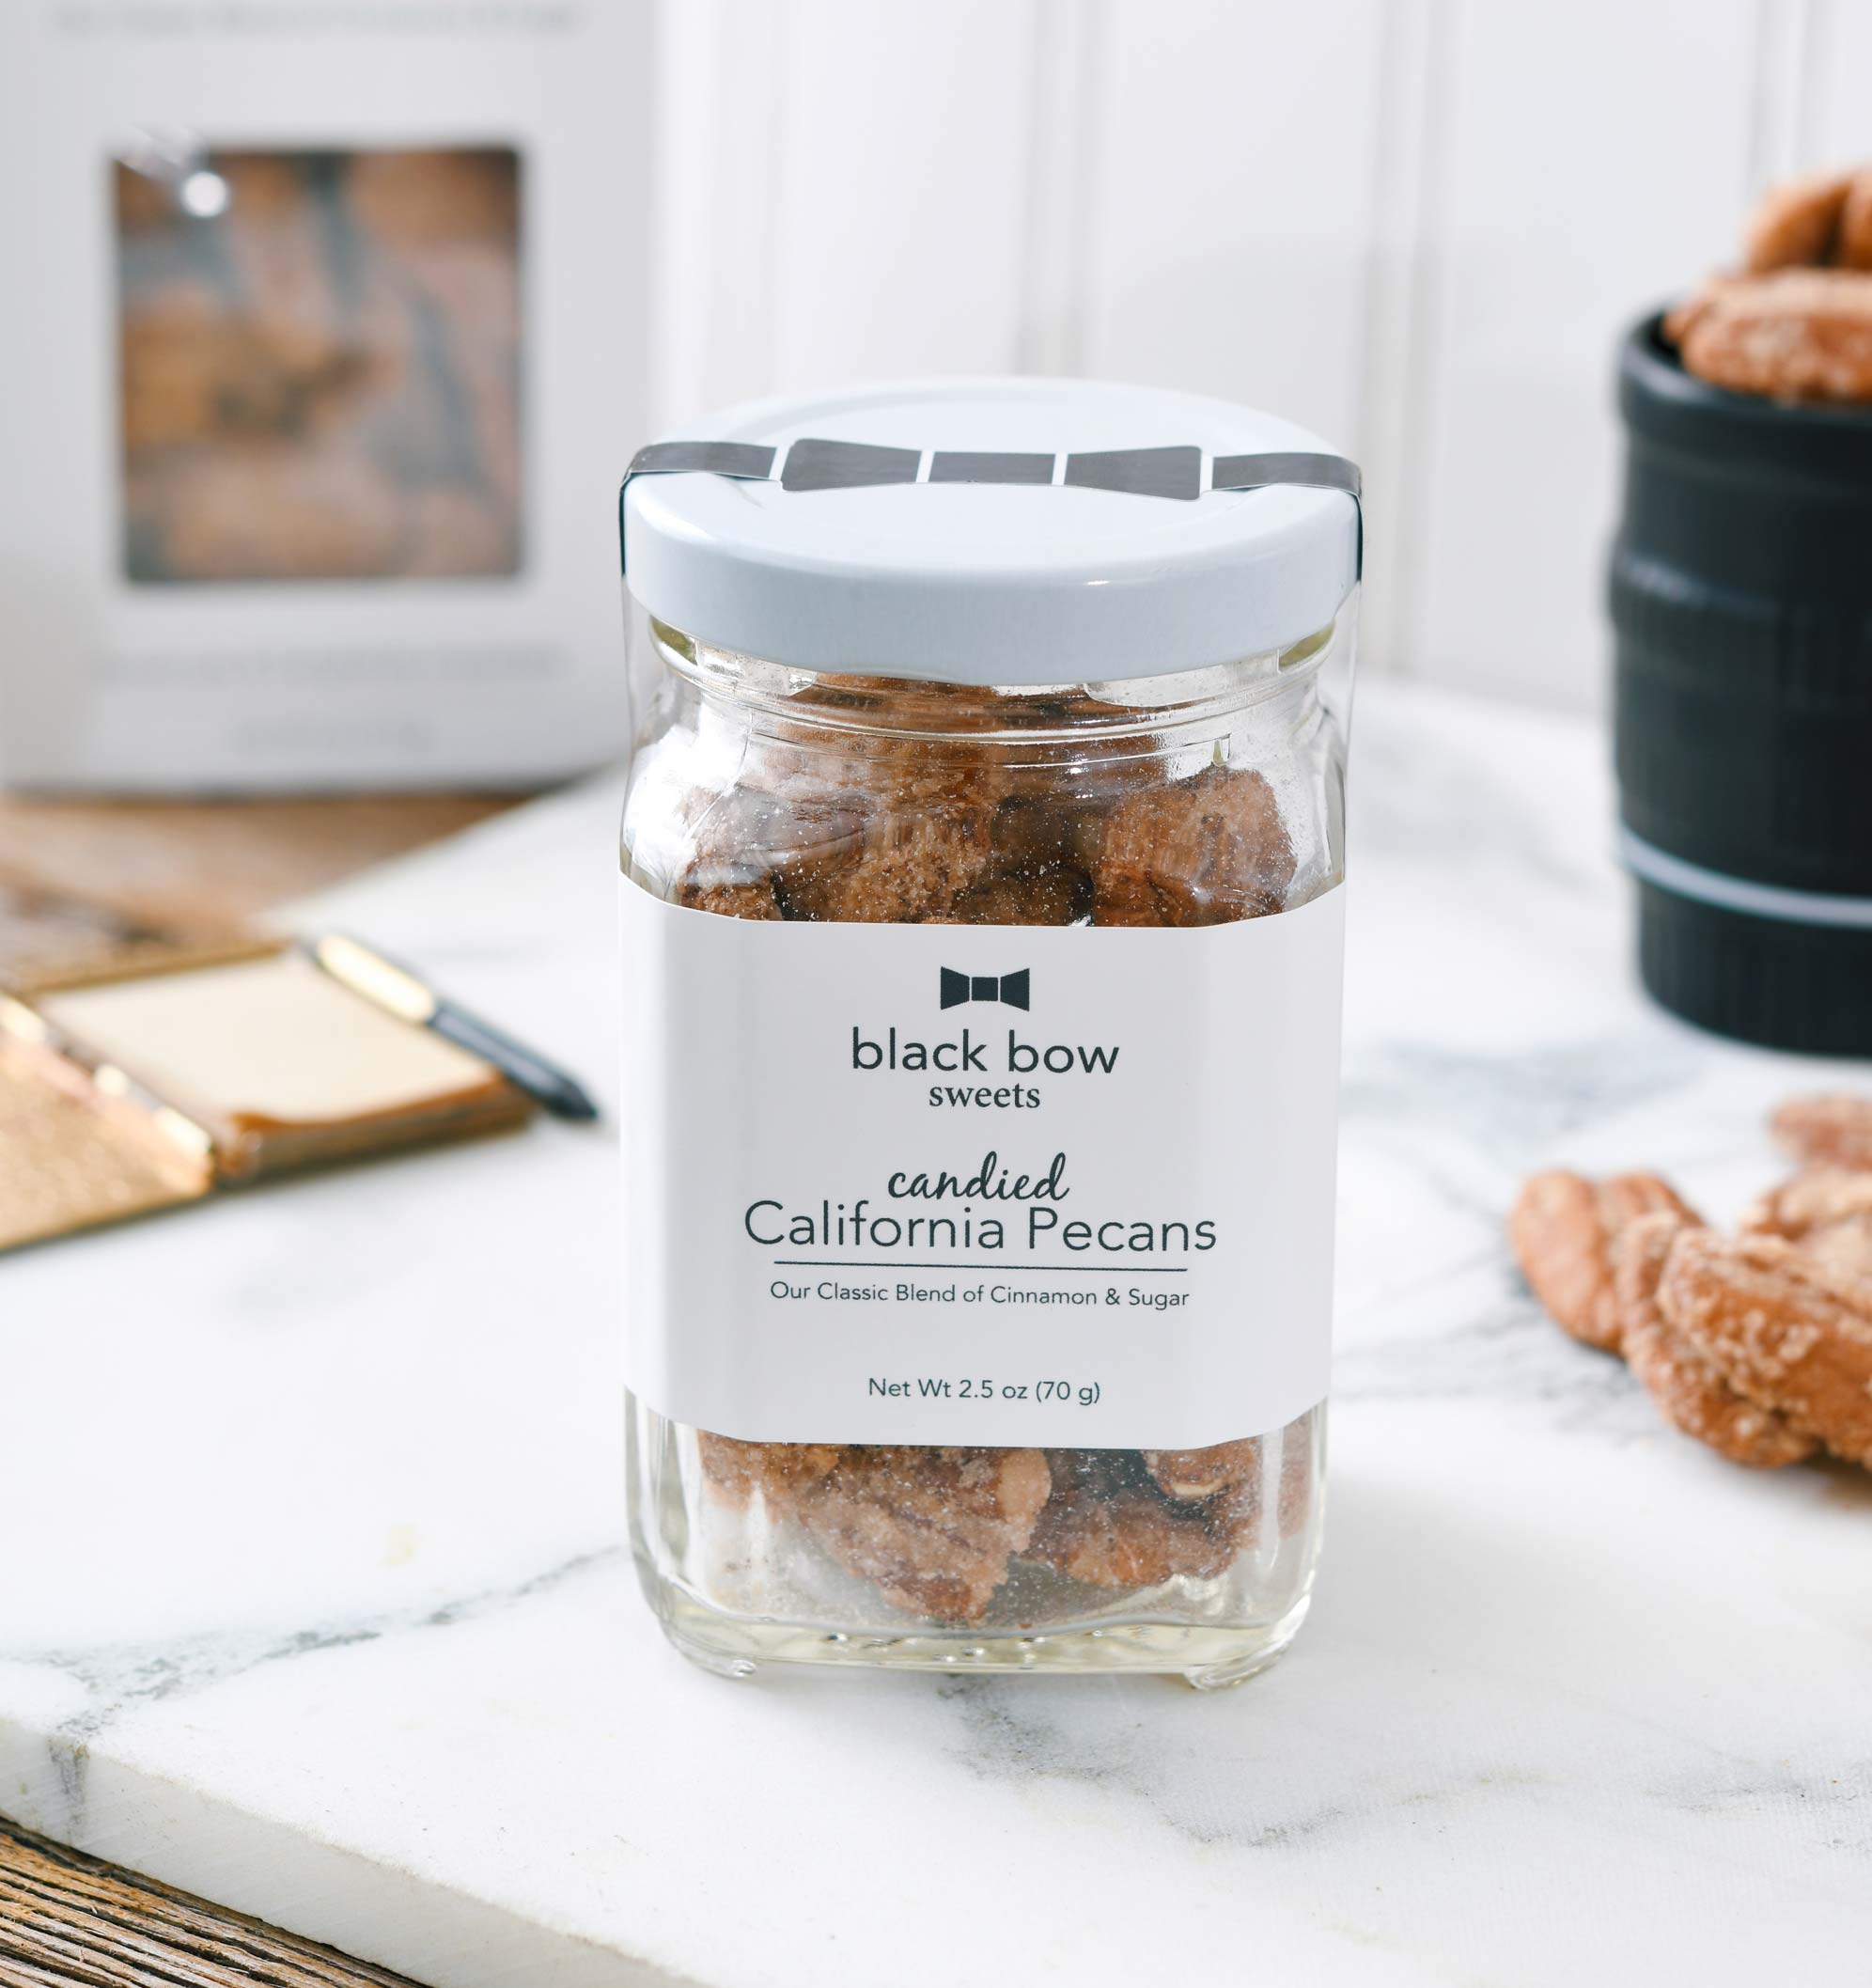 candied California pecans